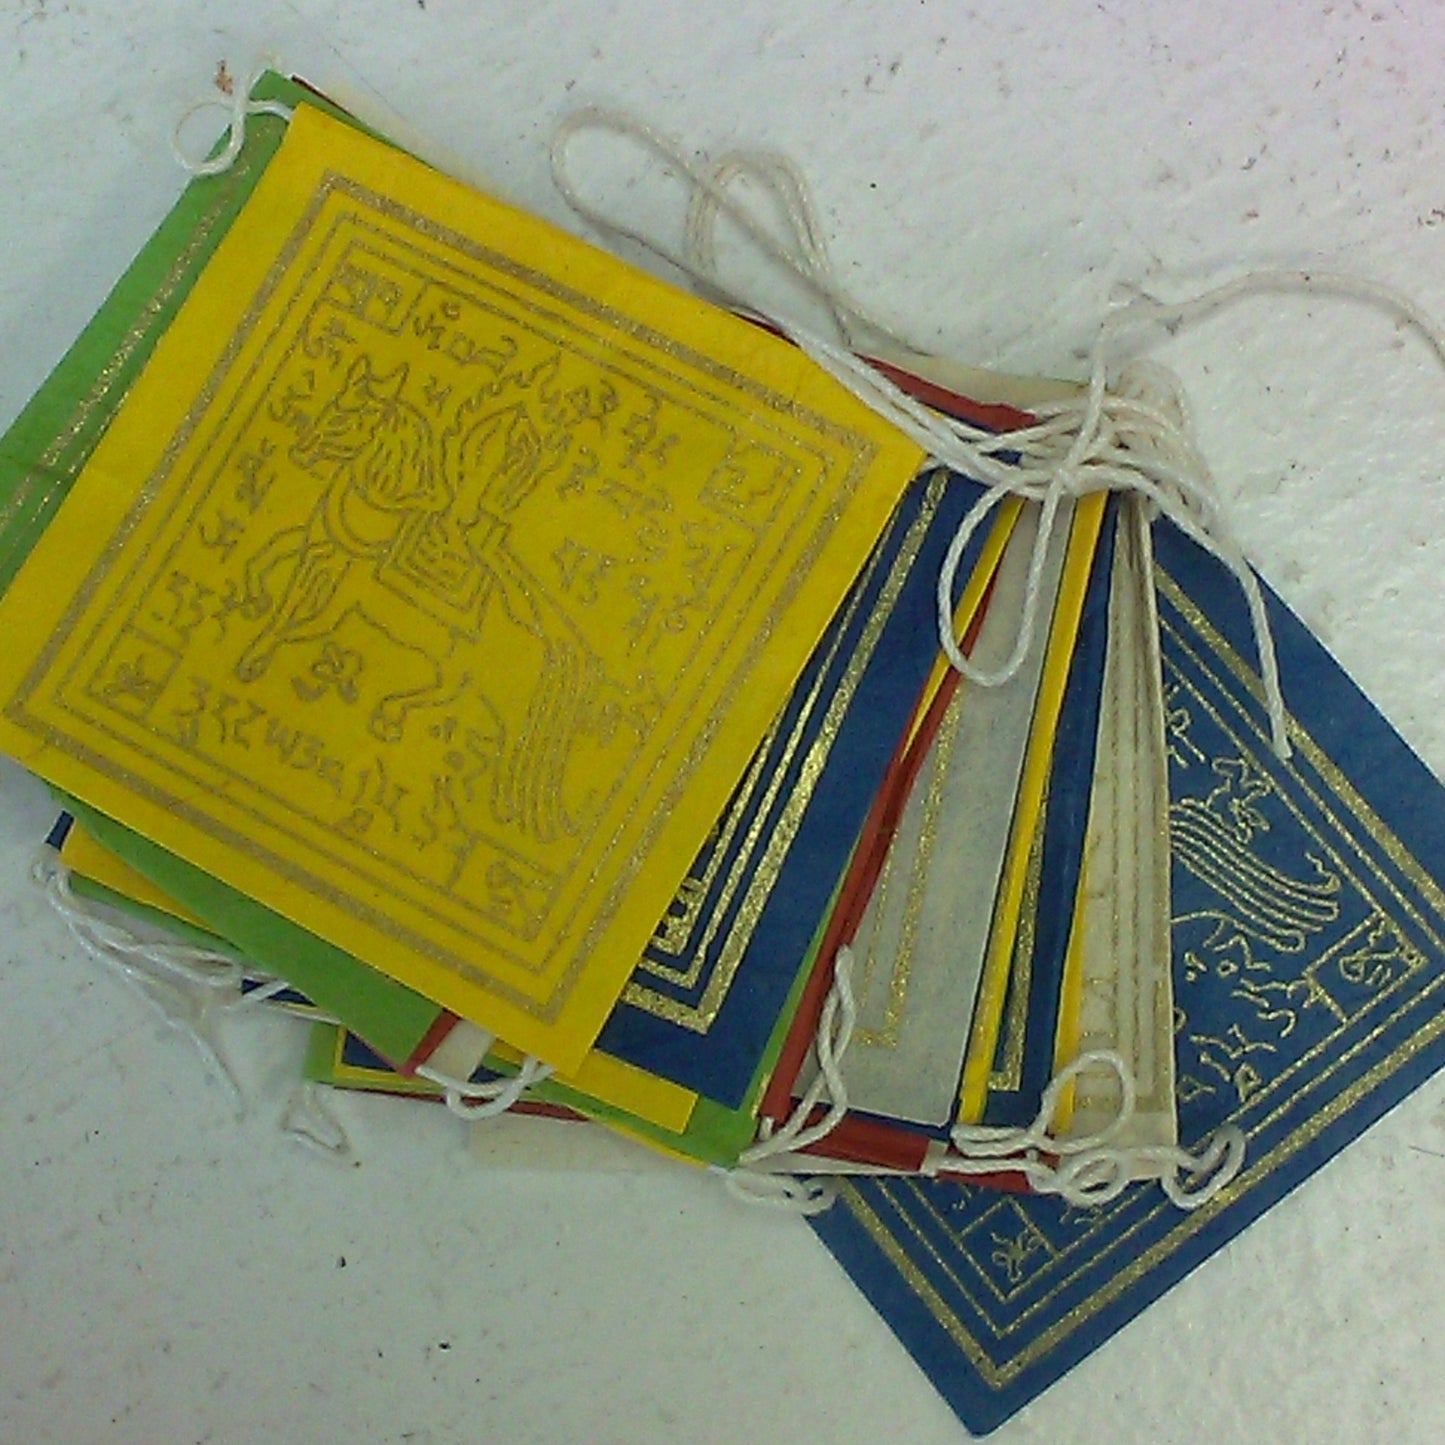 Small Paper Prayer Flags with Tibetan Traditional Imagery